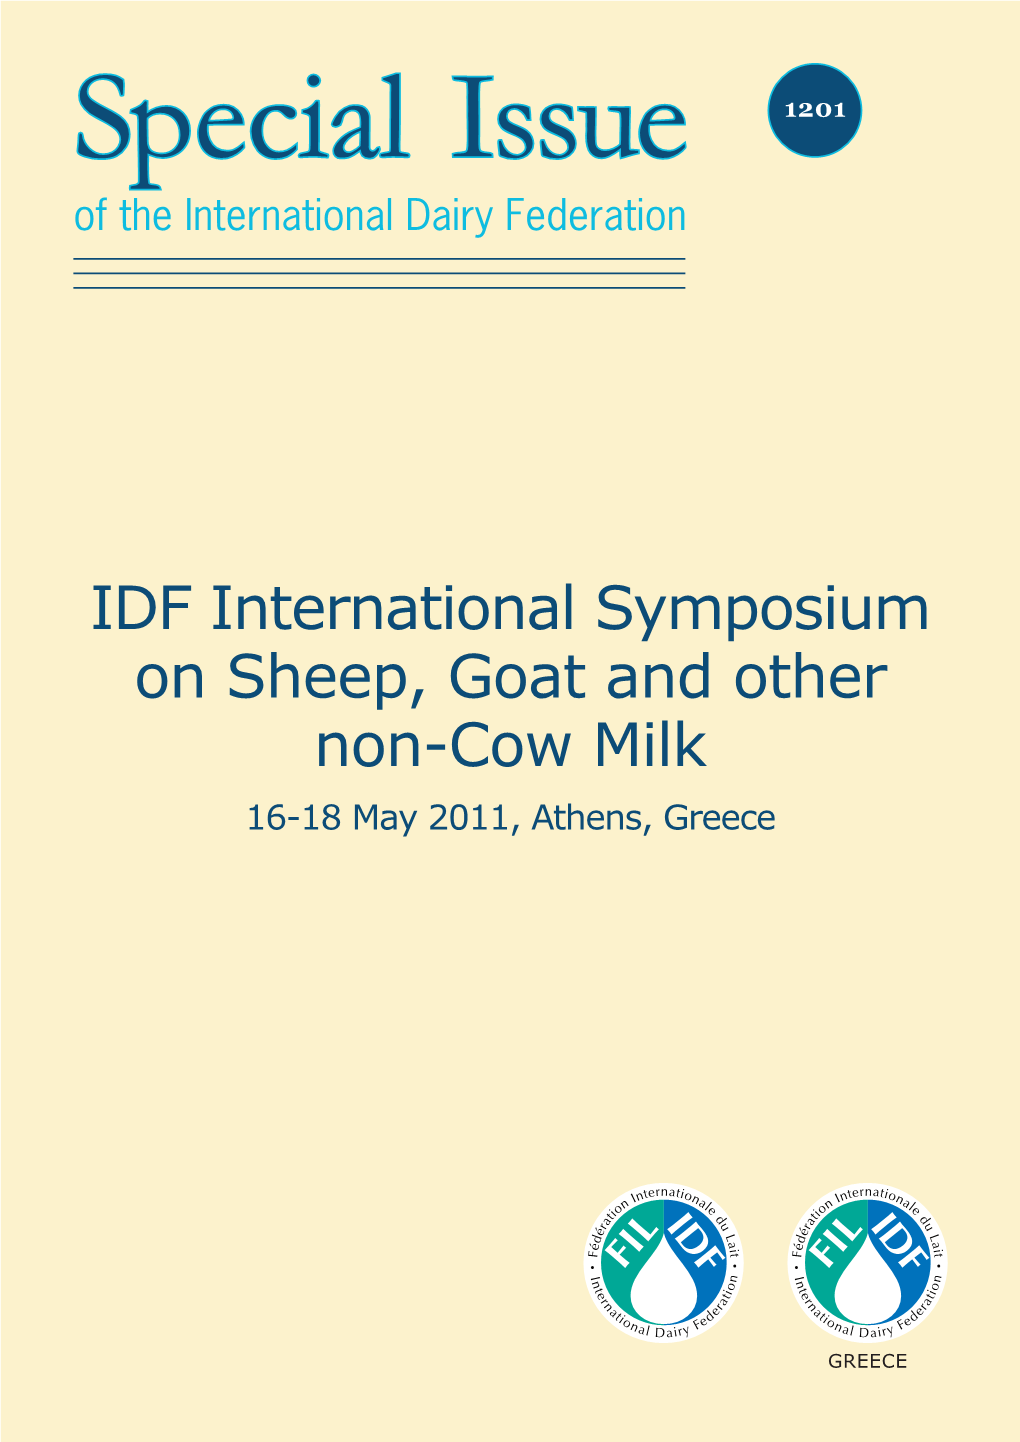 IDF International Symposium on Sheep, Goat and Other Non-Cow Milk 16-18 May 2011, Athens, Greece